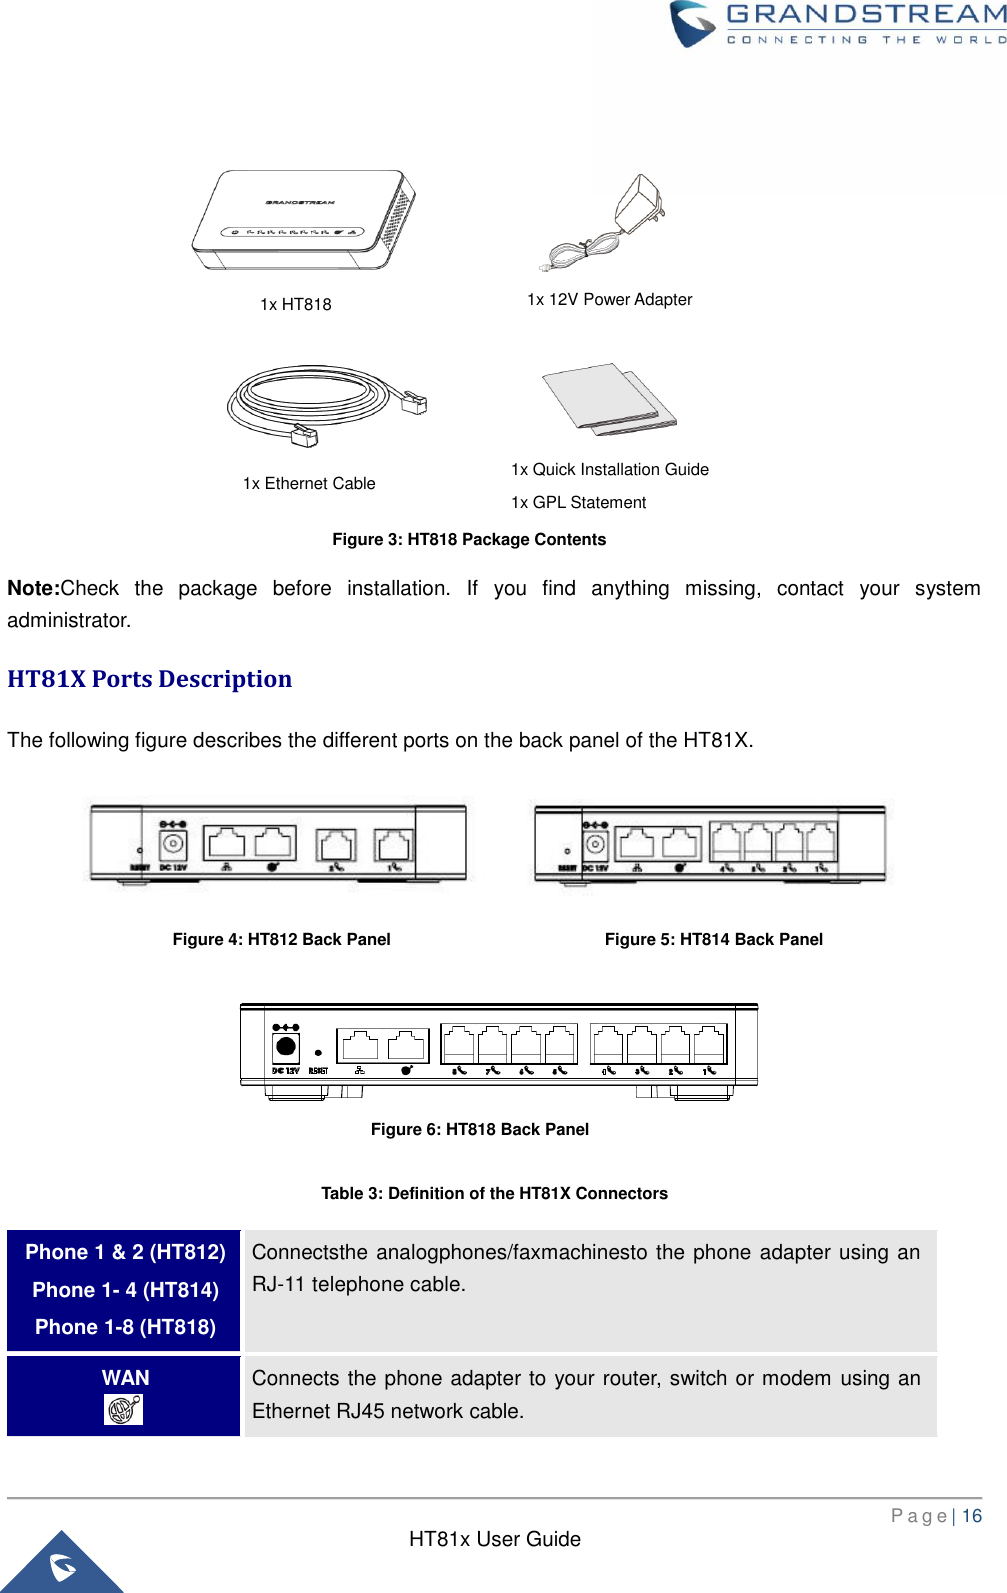       P a g e | 16      HT81x User Guide                 Note:Check  the  package  before  installation.  If  you  find  anything  missing,  contact  your  system administrator. HT81X Ports Description The following figure describes the different ports on the back panel of the HT81X.       Table 3: Definition of the HT81X Connectors Phone 1 &amp; 2 (HT812) Phone 1- 4 (HT814) Phone 1-8 (HT818)  Connectsthe analogphones/faxmachinesto the phone adapter using an RJ-11 telephone cable. WAN  Connects the phone adapter to your router, switch or modem  using an Ethernet RJ45 network cable. co Figure 3: HT818 Package Contents 1x HT818 1x 12V Power Adapter 1x Ethernet Cable 1x Quick Installation Guide 1x GPL Statement Figure 4: HT812 Back Panel Figure 5: HT814 Back Panel Figure 6: HT818 Back Panel 